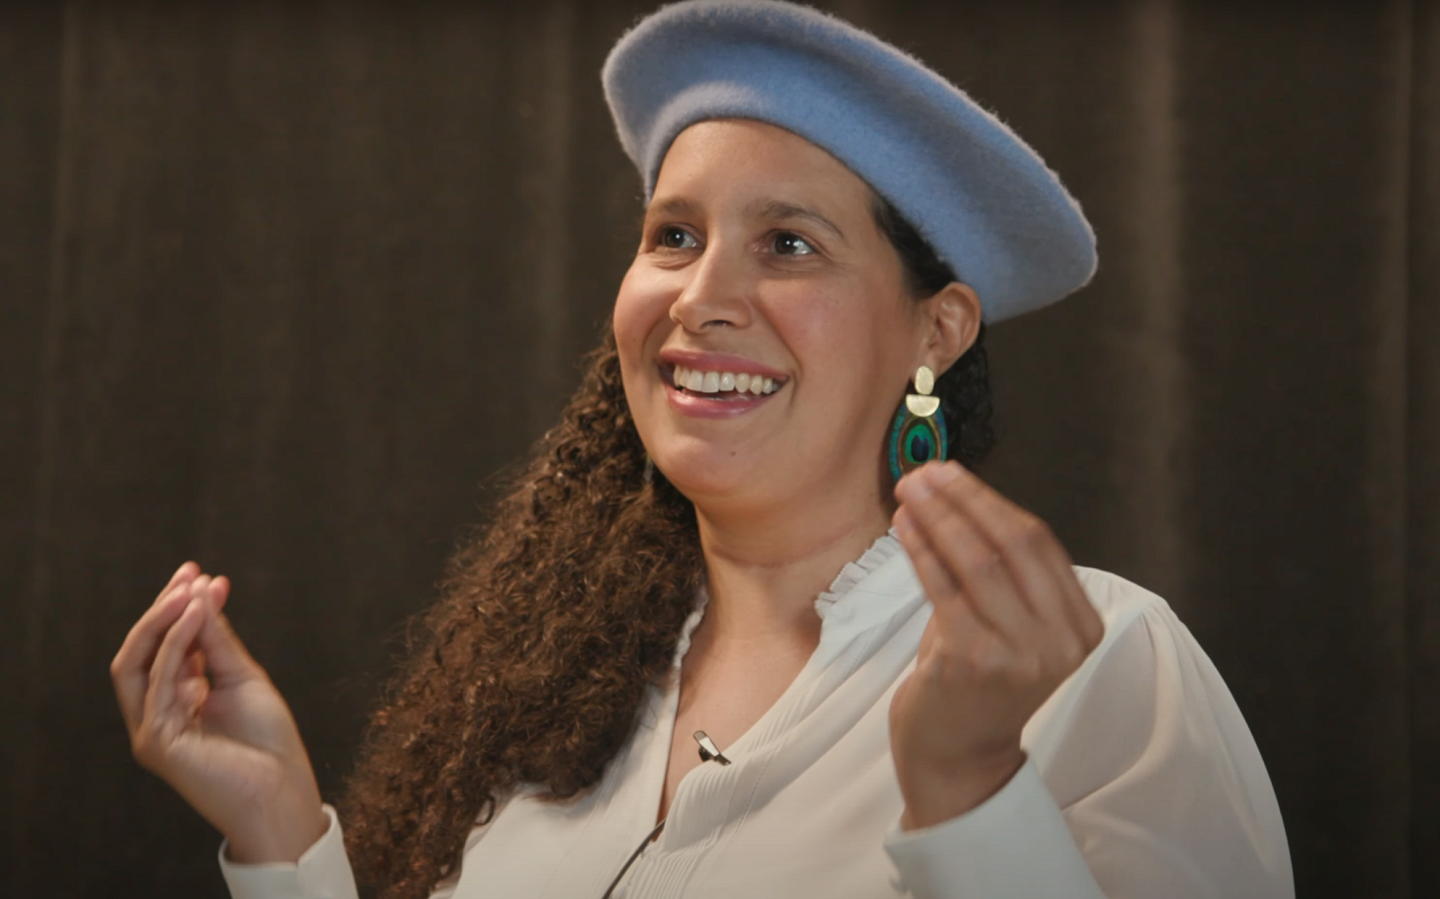 a woman with long brown curly hair and a grey beret smiling and gesturing with her hands